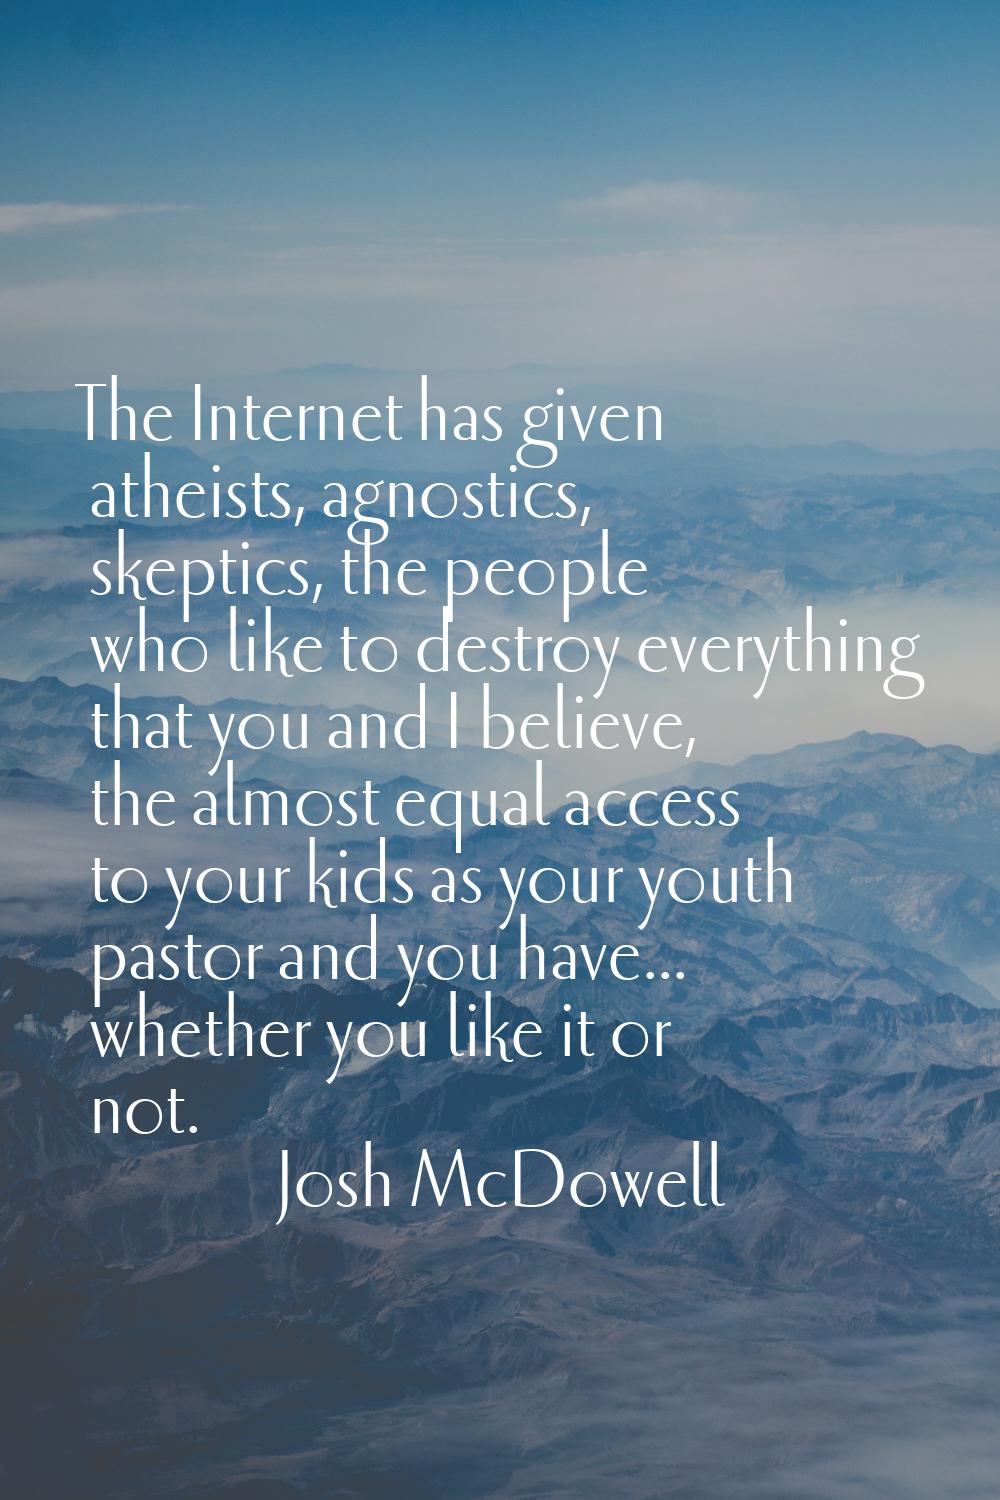 The Internet has given atheists, agnostics, skeptics, the people who like to destroy everything tha